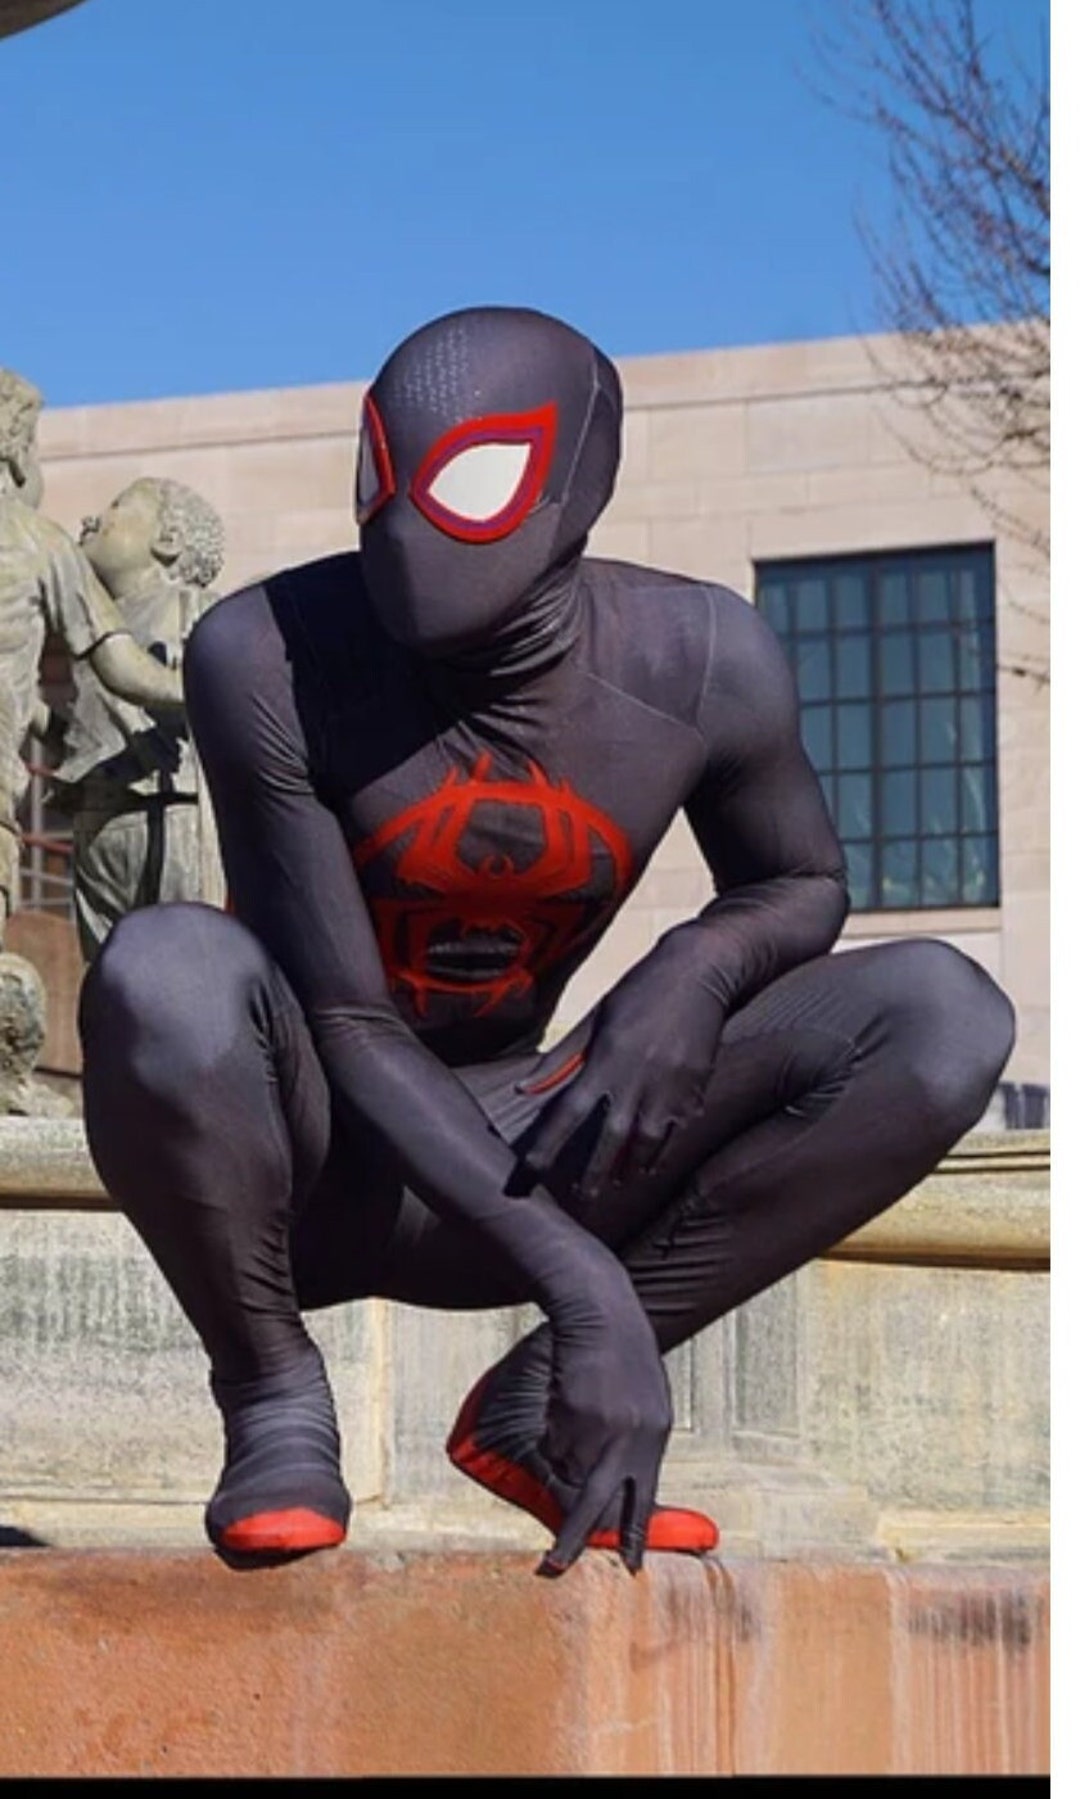 Spider-Man: Miles Morales unveils suit inspired by Into the Spider